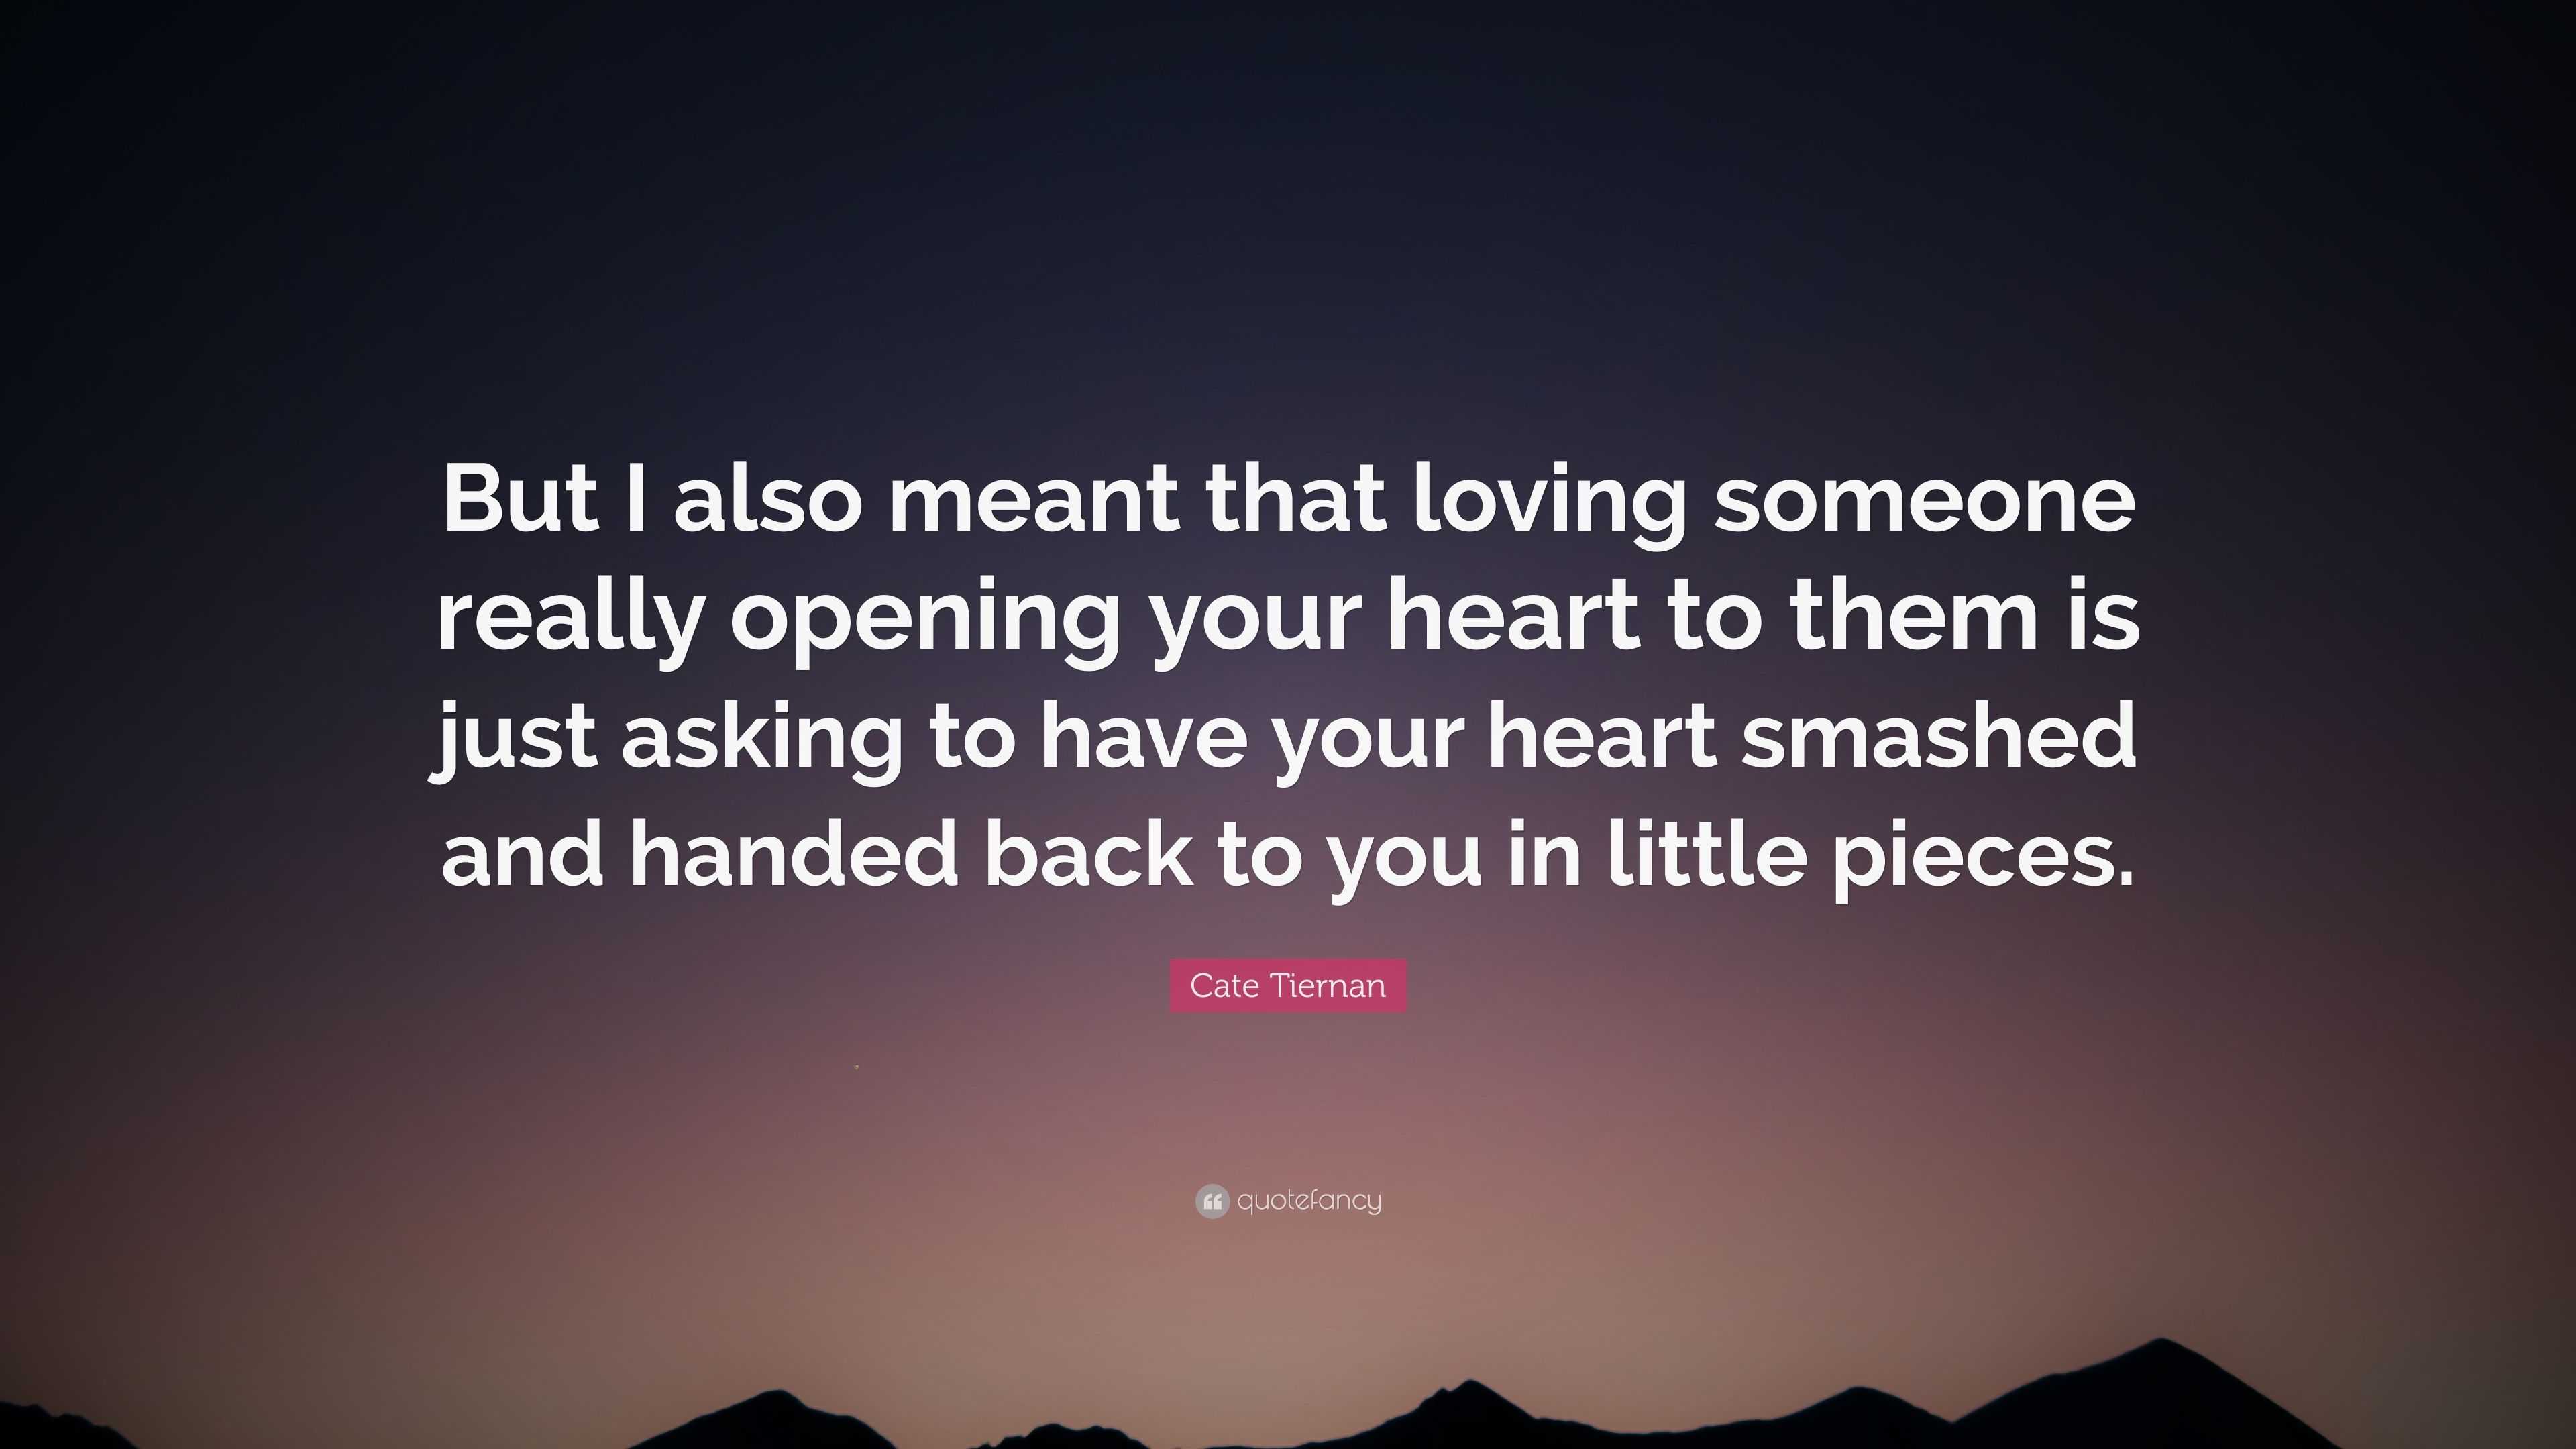 Cate Tiernan Quote “But I also meant that loving someone really opening your heart